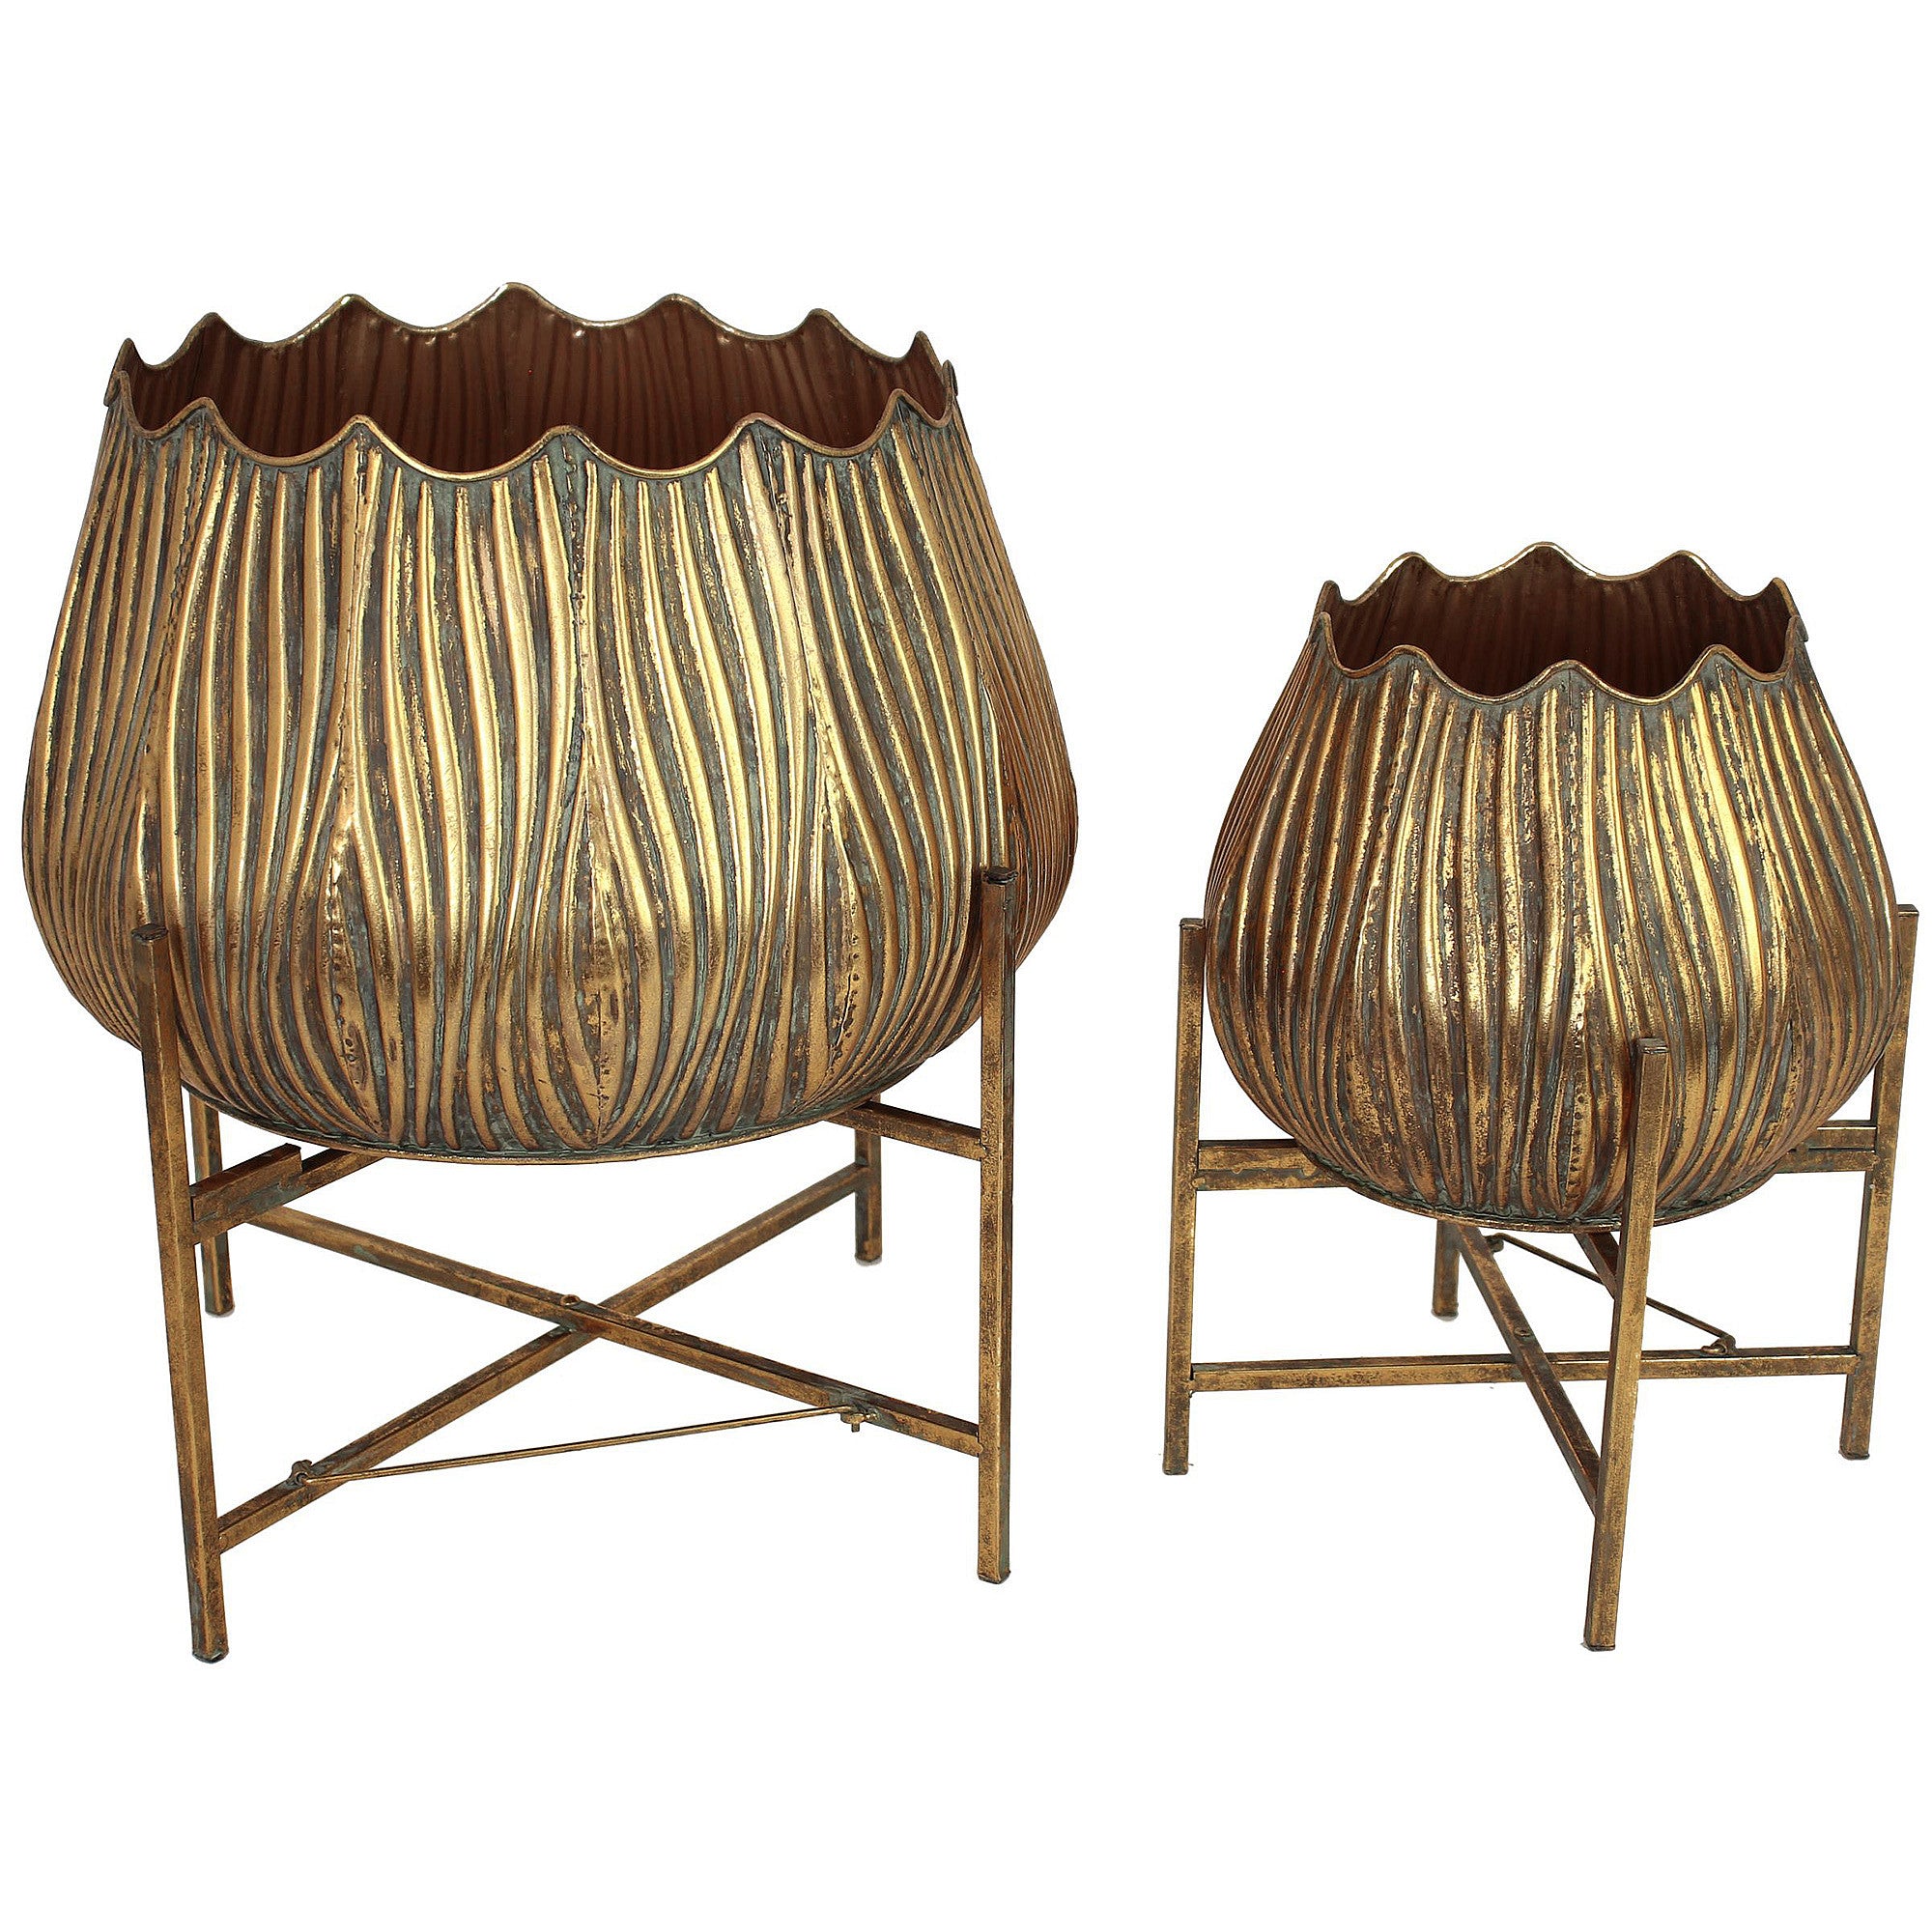 Antique Gold Tulip Planters on Stand | Set of 2